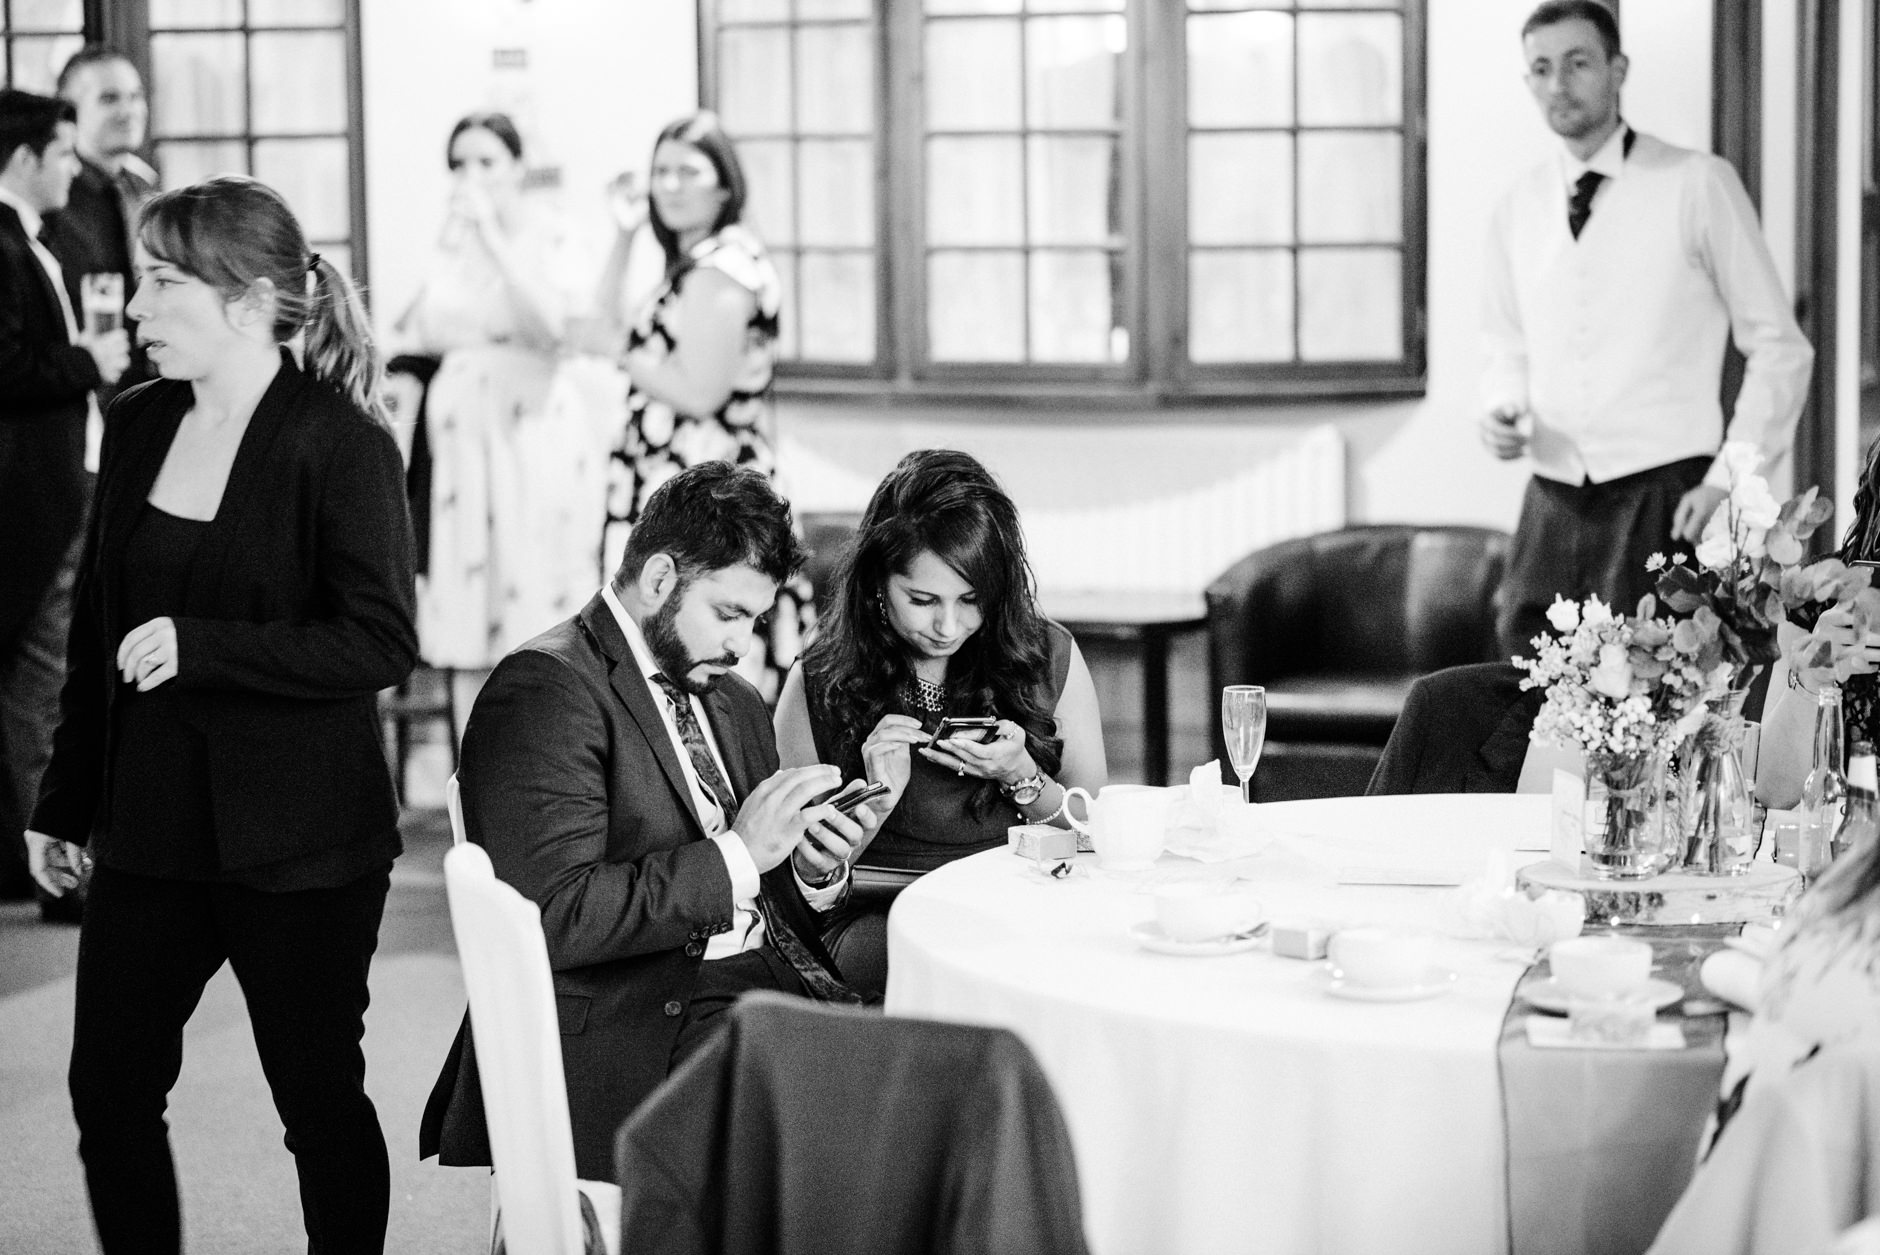 A couple of wedding guests checking their phones